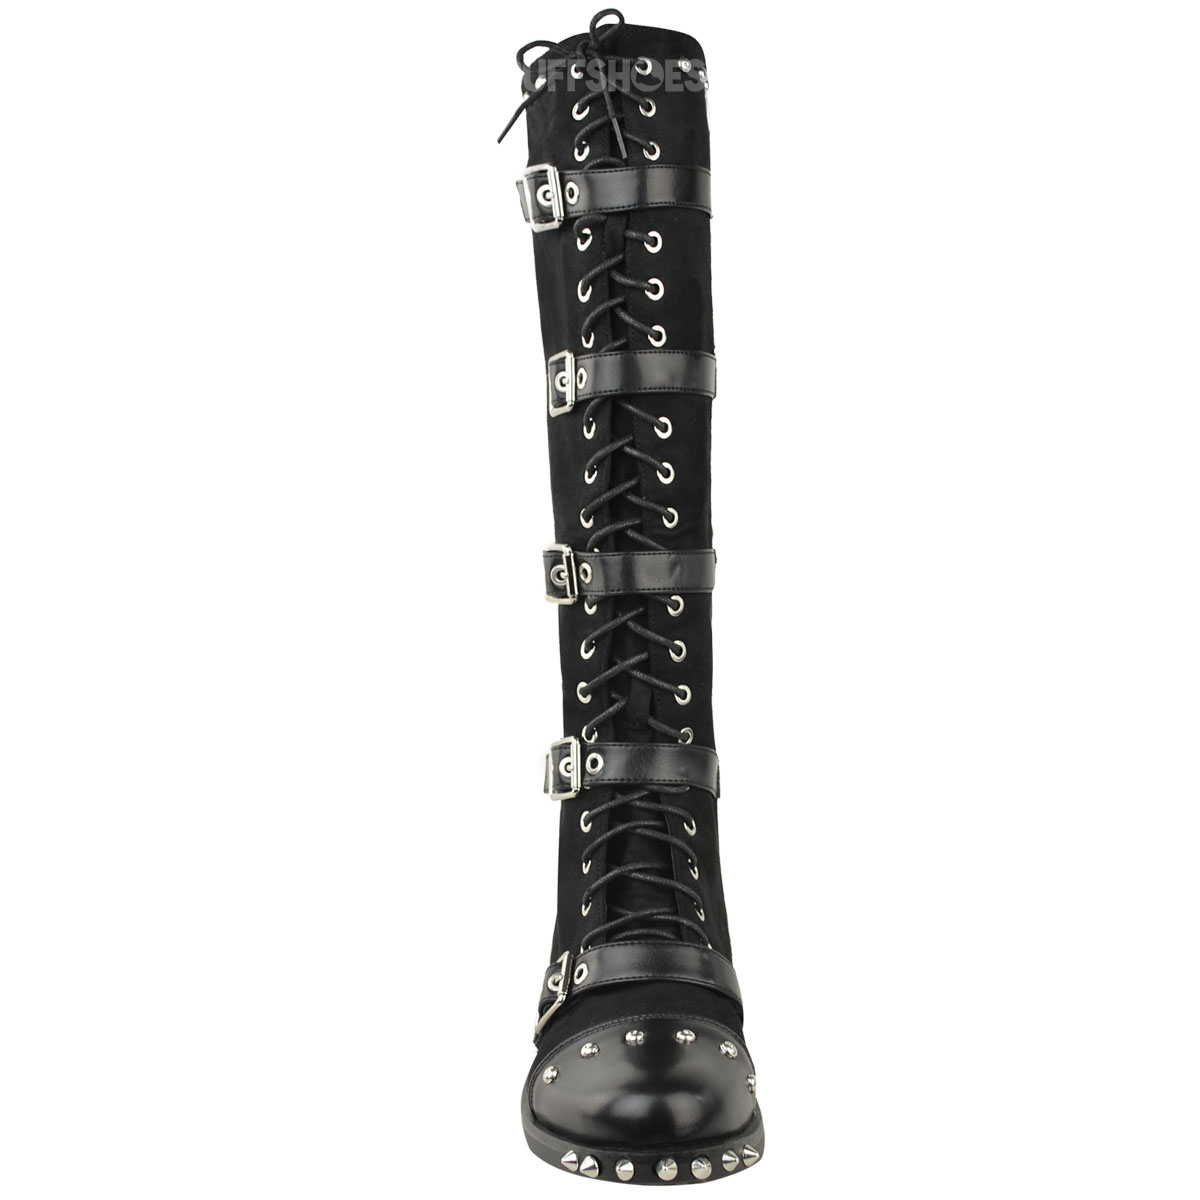 Femme Mesdames Knee High Boots Rivets Punk Grunge Rock pointus Mollet Hiver Chaussures 